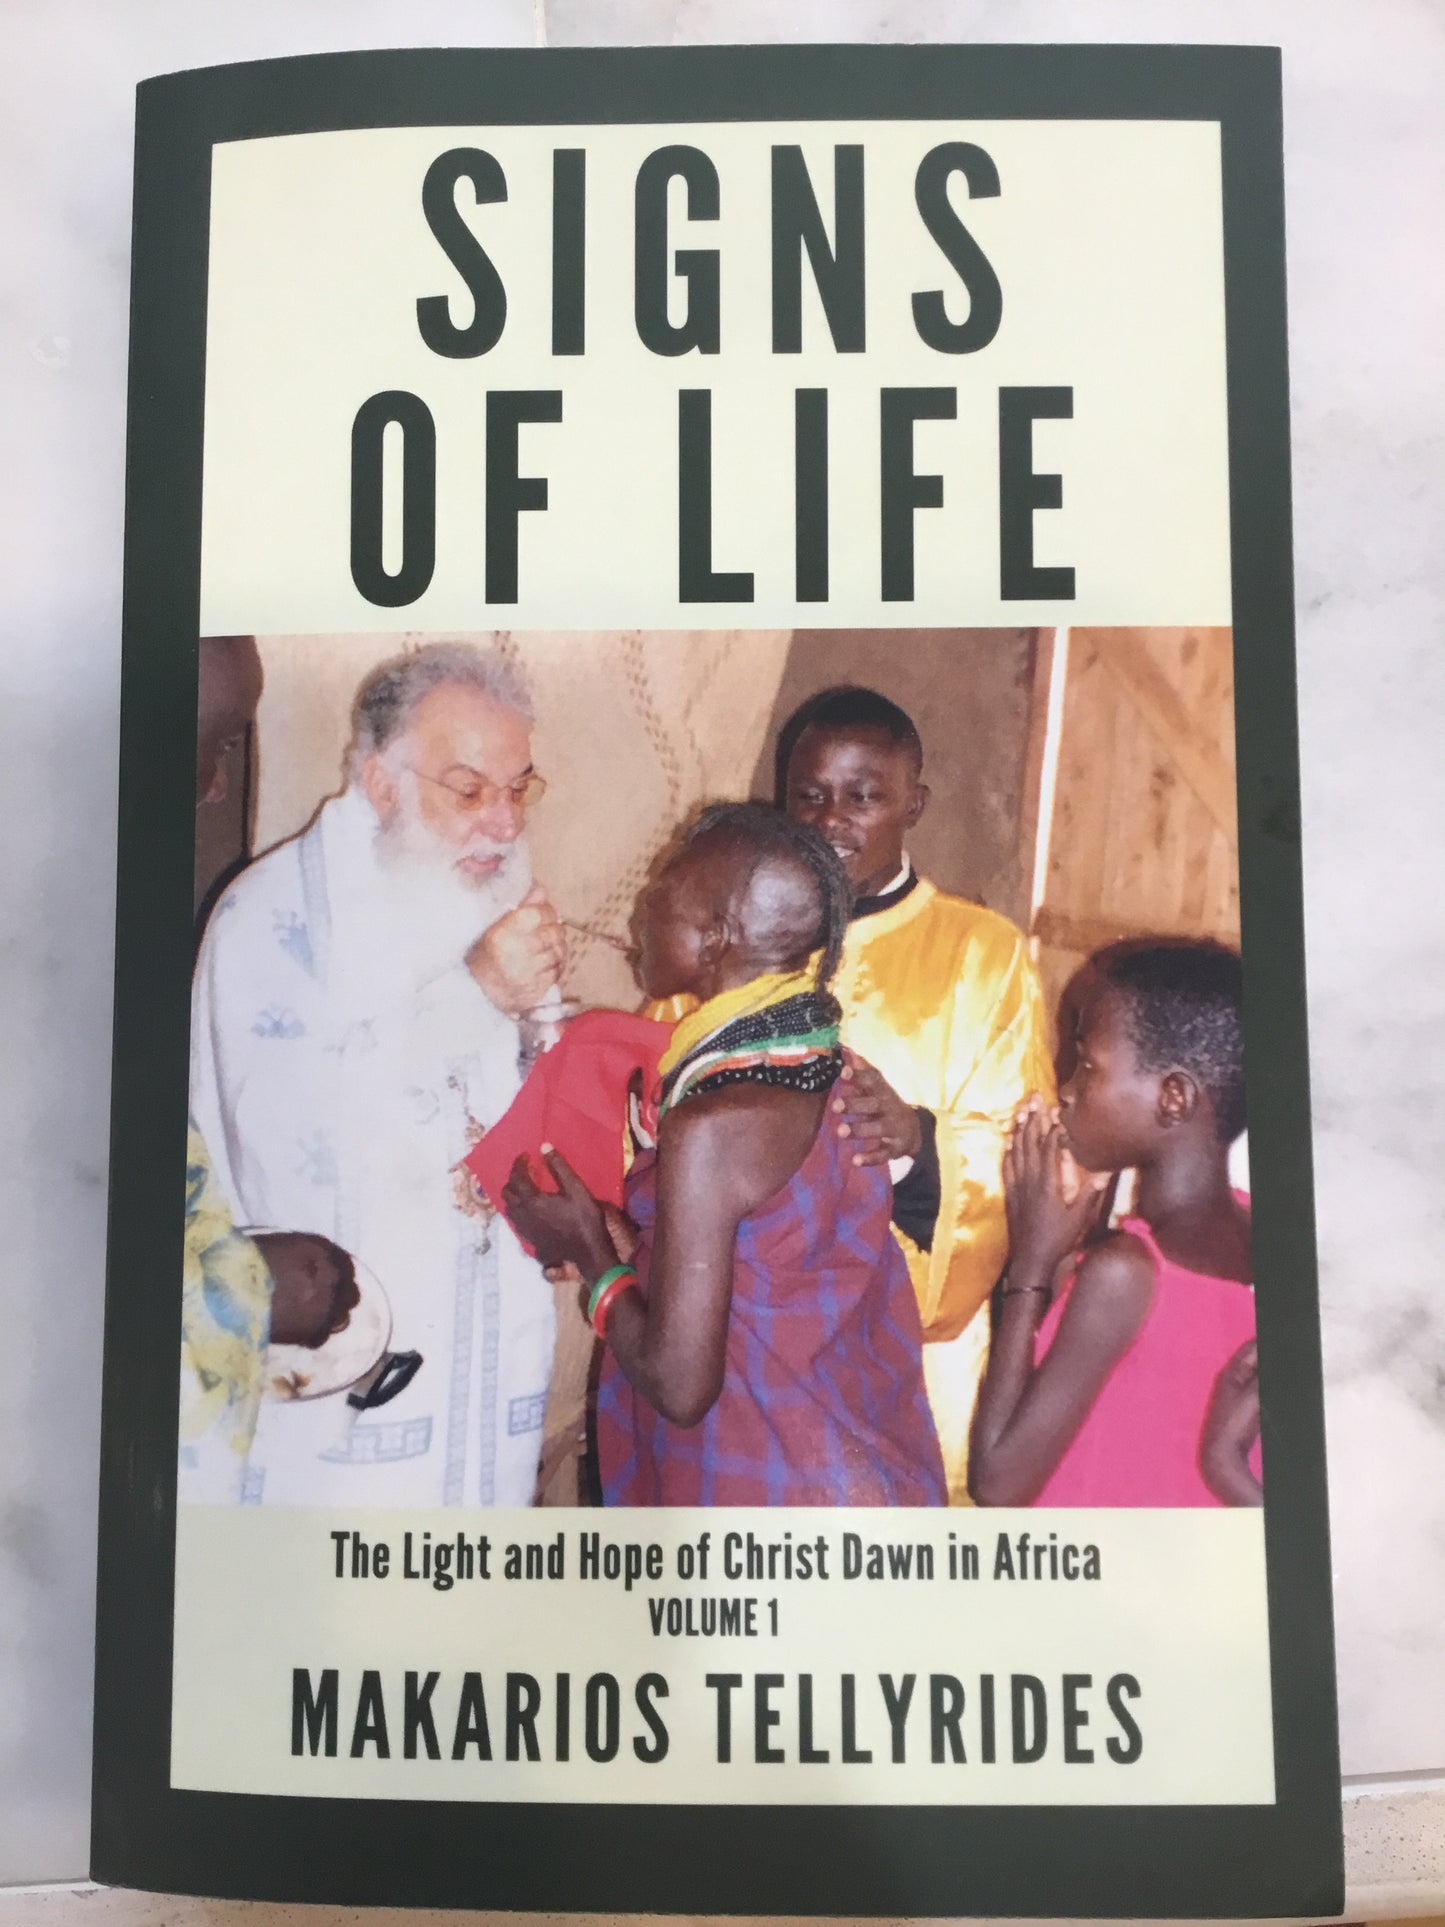 Signs of Life: The Light and Hope of Christ Dawn in Africa